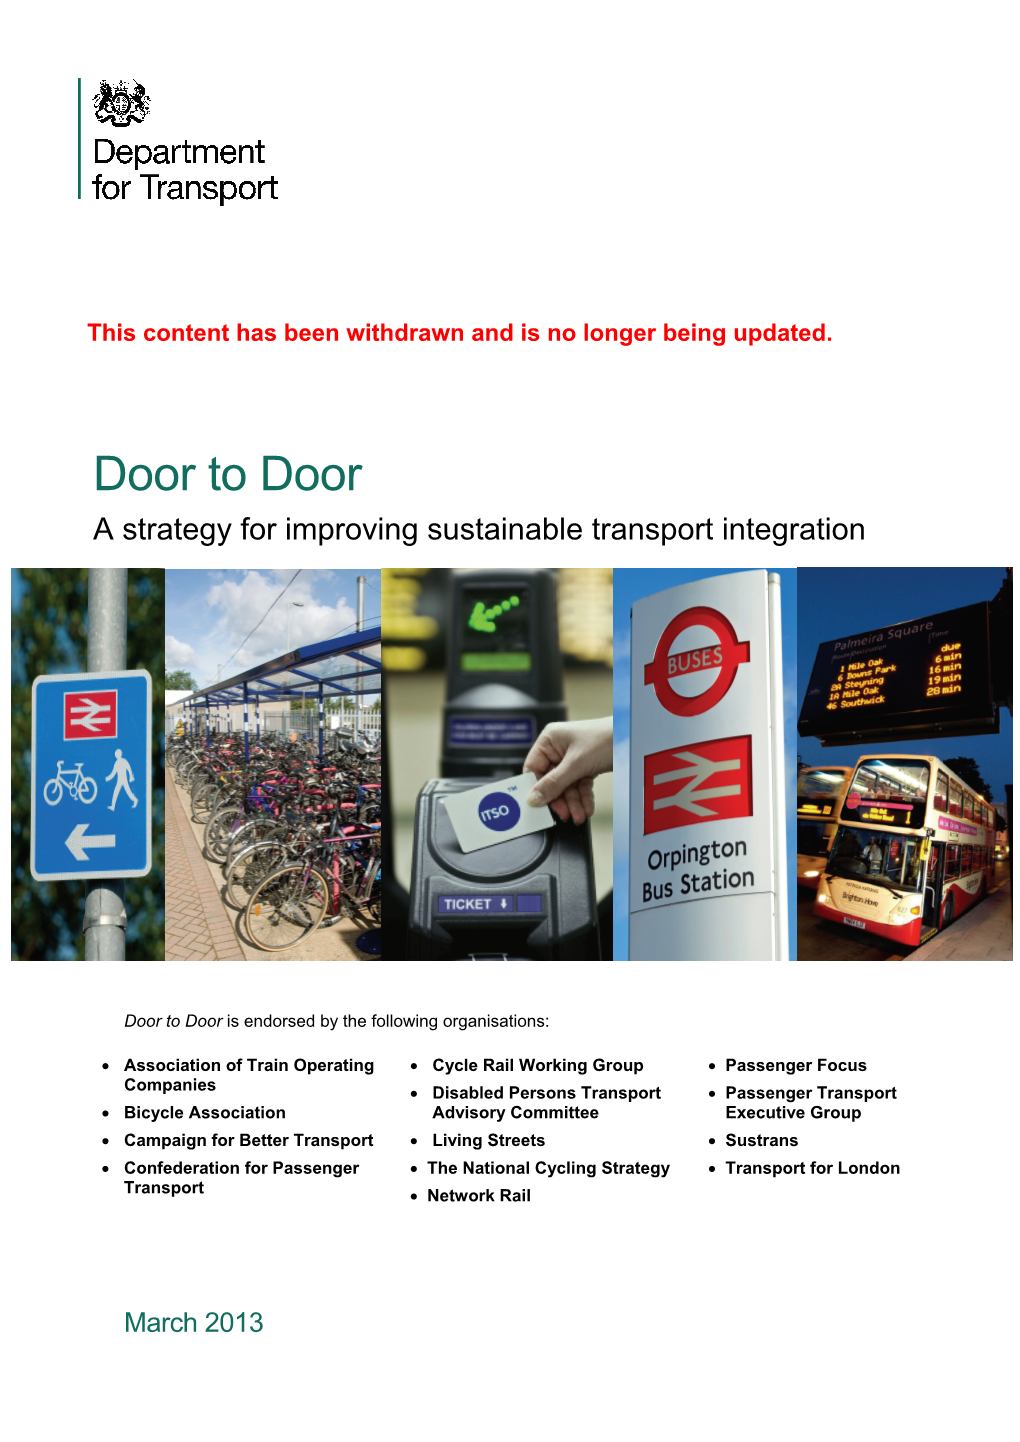 A Strategy for Improving Sustainable Transport Integration